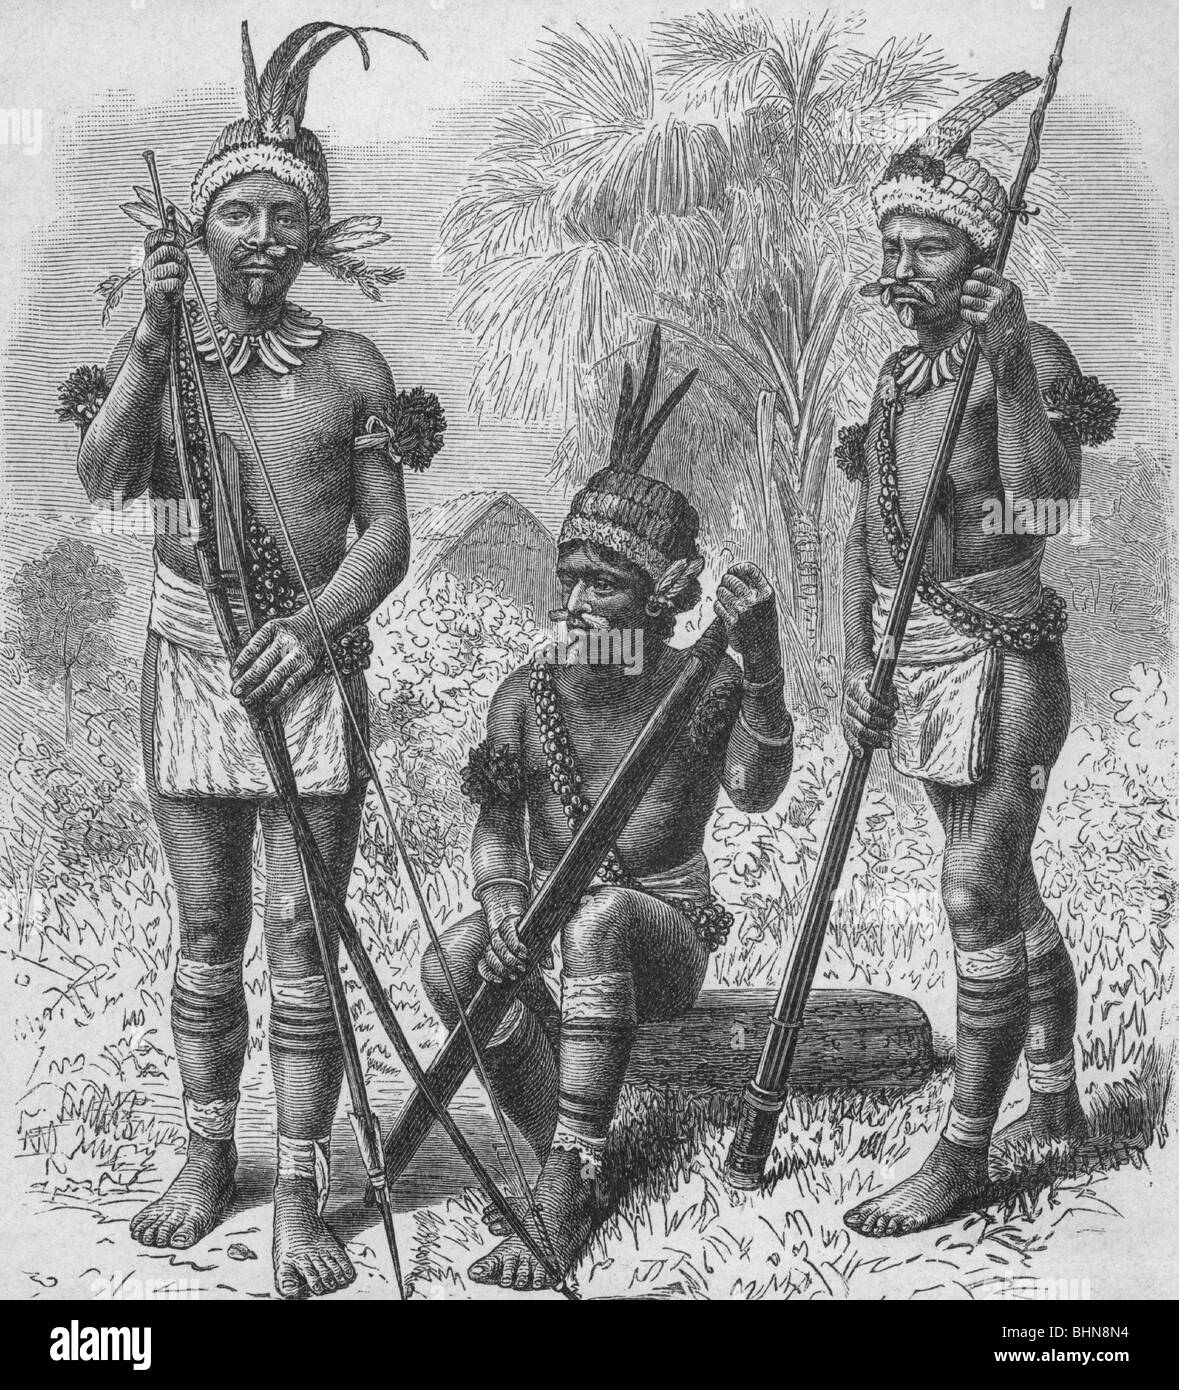 geography / travel, South America, people, Indians with traditional body decoration, illustration after photography from Damann Album, circa turn of the century, historic, historical, jewellery, loincloth, loin cloth, loincloths, loin cloths, perforate, perforating, perforated noses, indigenous, native, ethnic, ethnology, full length, men, man, head trappings, feather headdress, bow and arrow, archer, bow hunter, bowman, archers, bow hunters, bowmen, warrior, warriors, Stock Photo